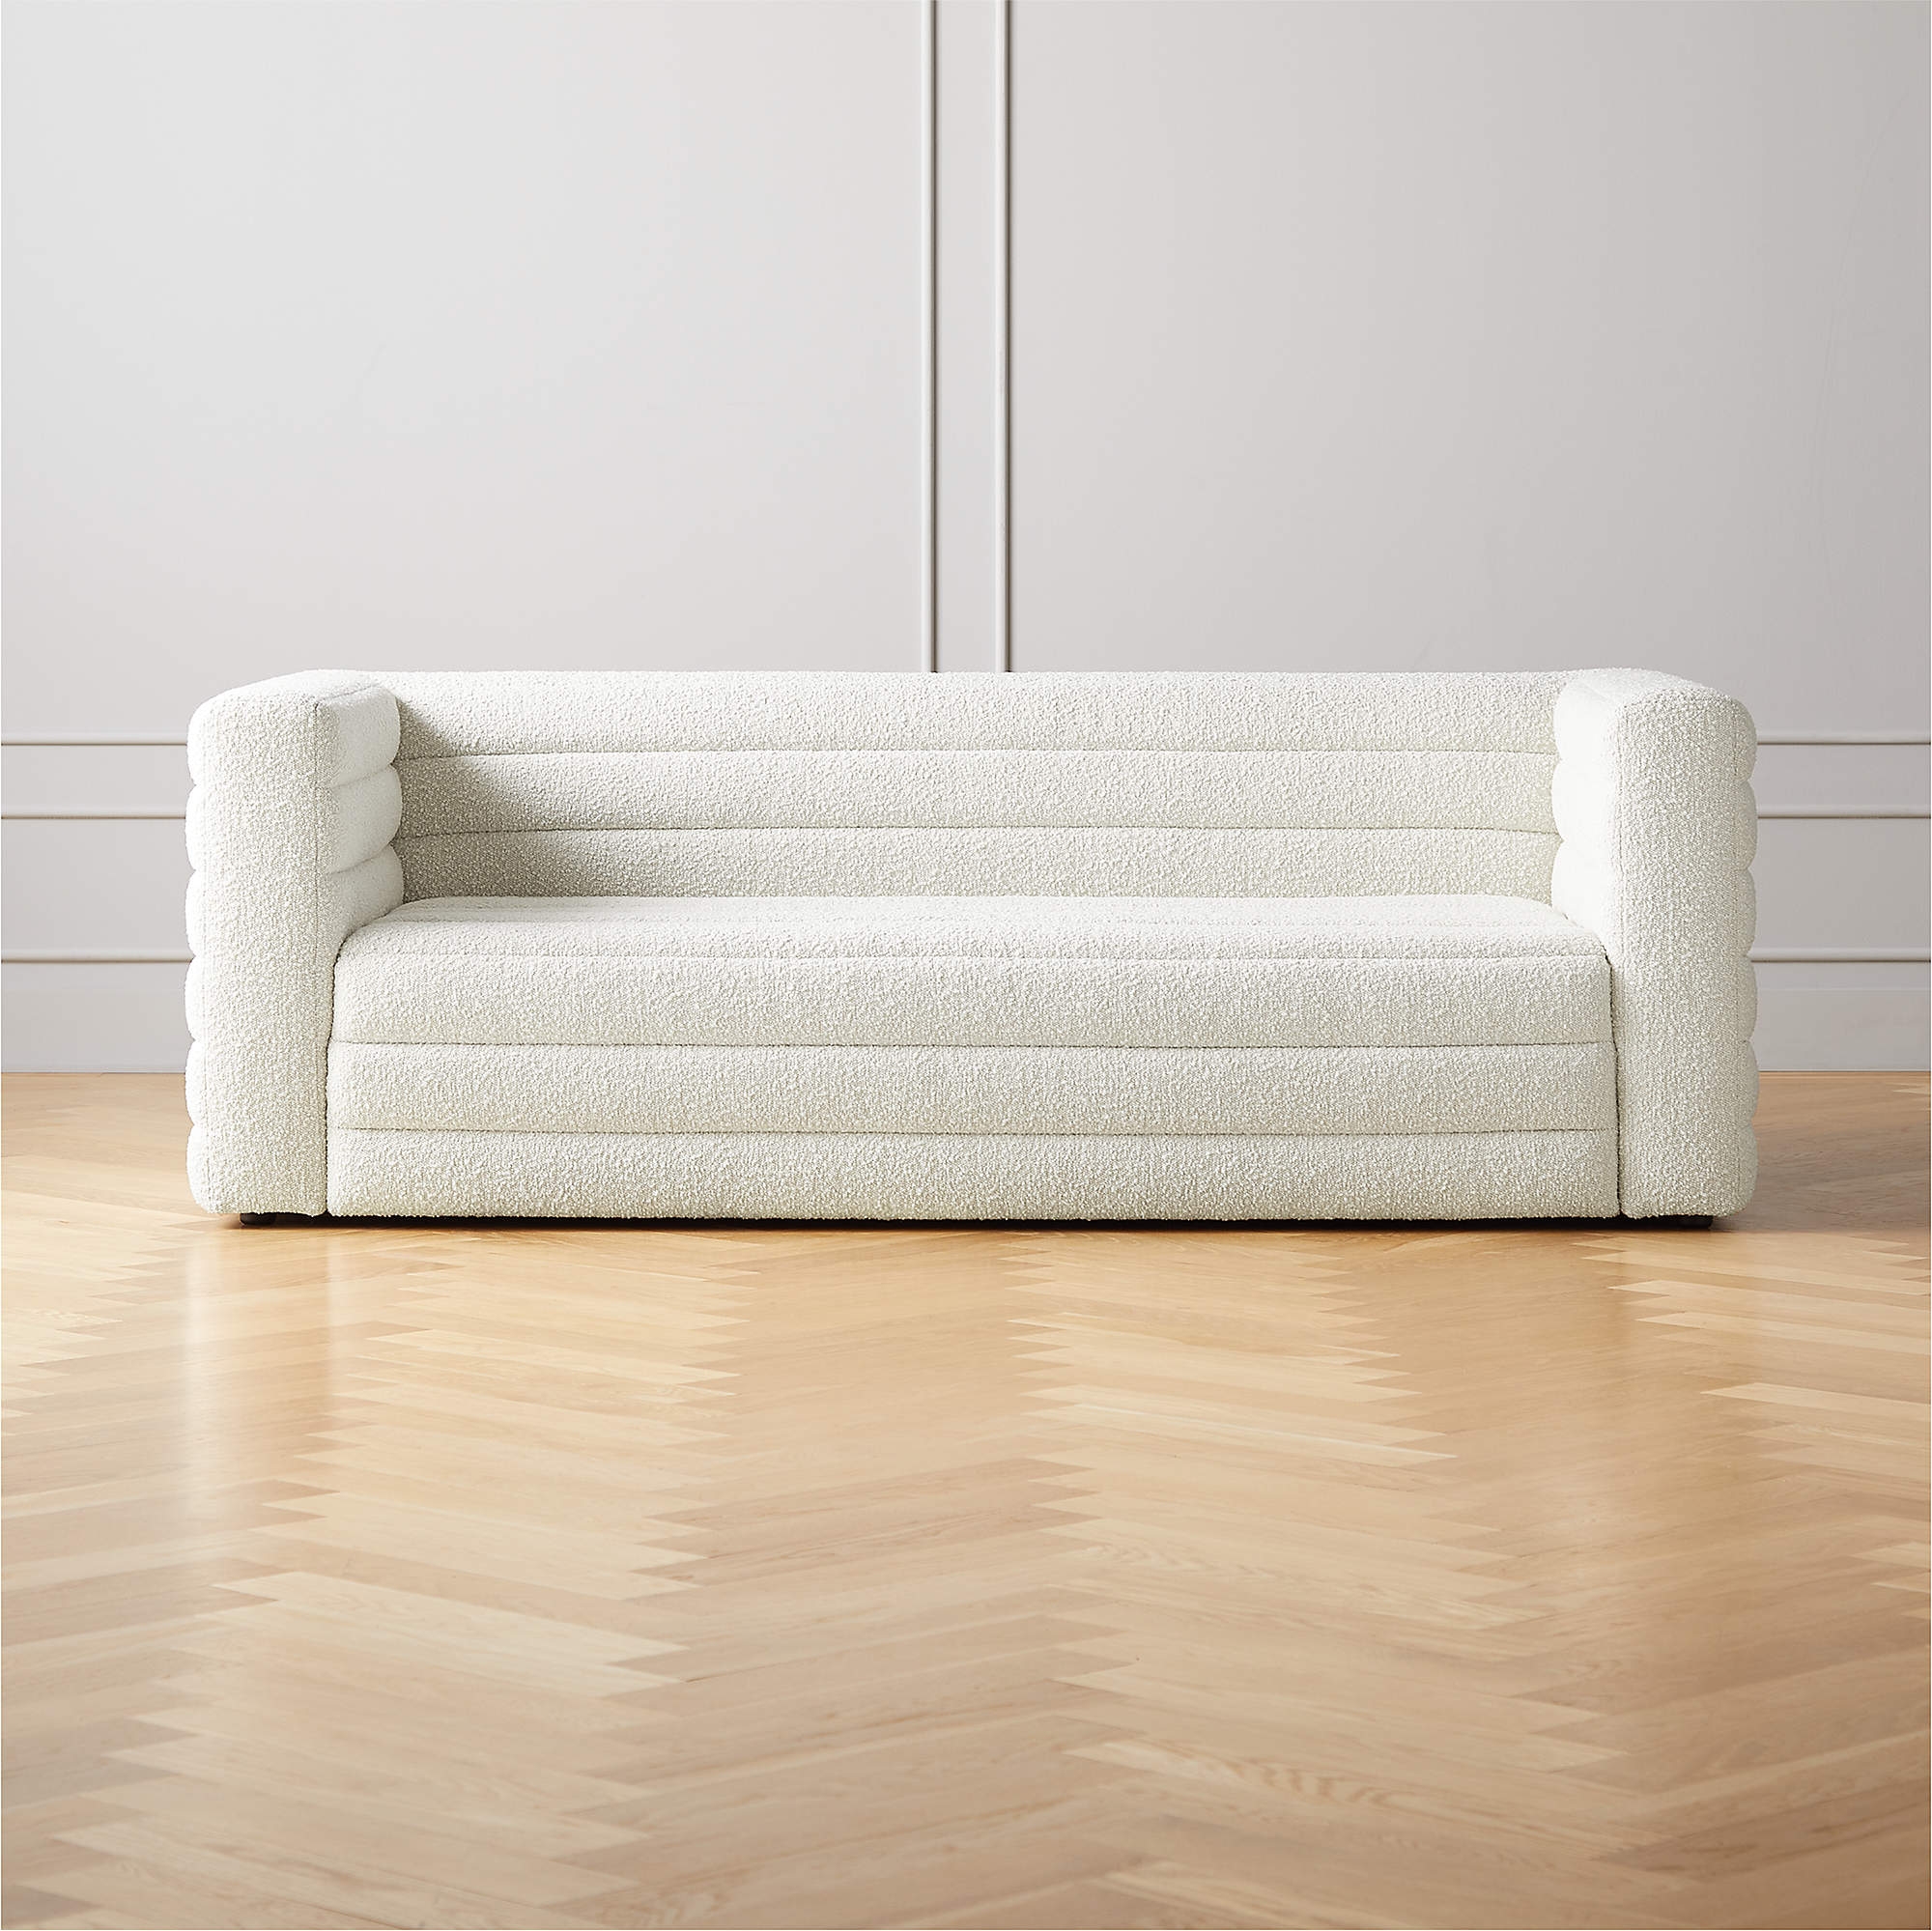 Strato Wooly Sand Sofa, Boucle White, 80" - Image 6